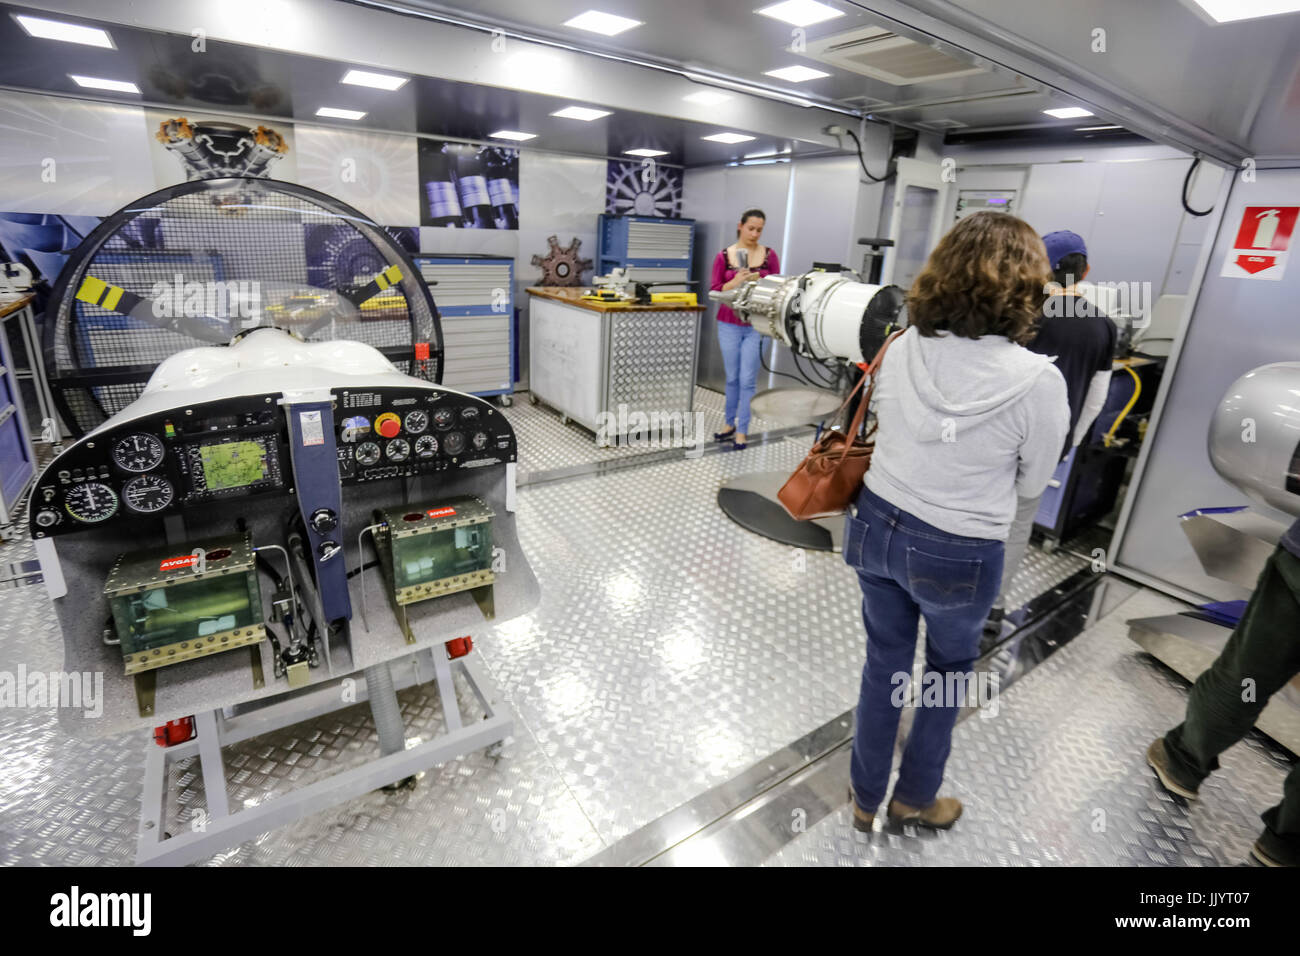 SÃO JOSÉ DOS CAMPOS, SP - 21.07.2017: ESCOLA M'VEL SENAI DE AVIÔNICOS - Senai-SP Mobile School of Avionics is the first school of its kind in Brazil. With state-of-the-art technology, the mobile unit was designed to offer professional training and courses to the maintenance and manufacturing segments, including all embedded electronics present in aircraft such as navigation, communication and flight control systems. (Photo: Luis Lima Jr/Fotoarena) Stock Photo